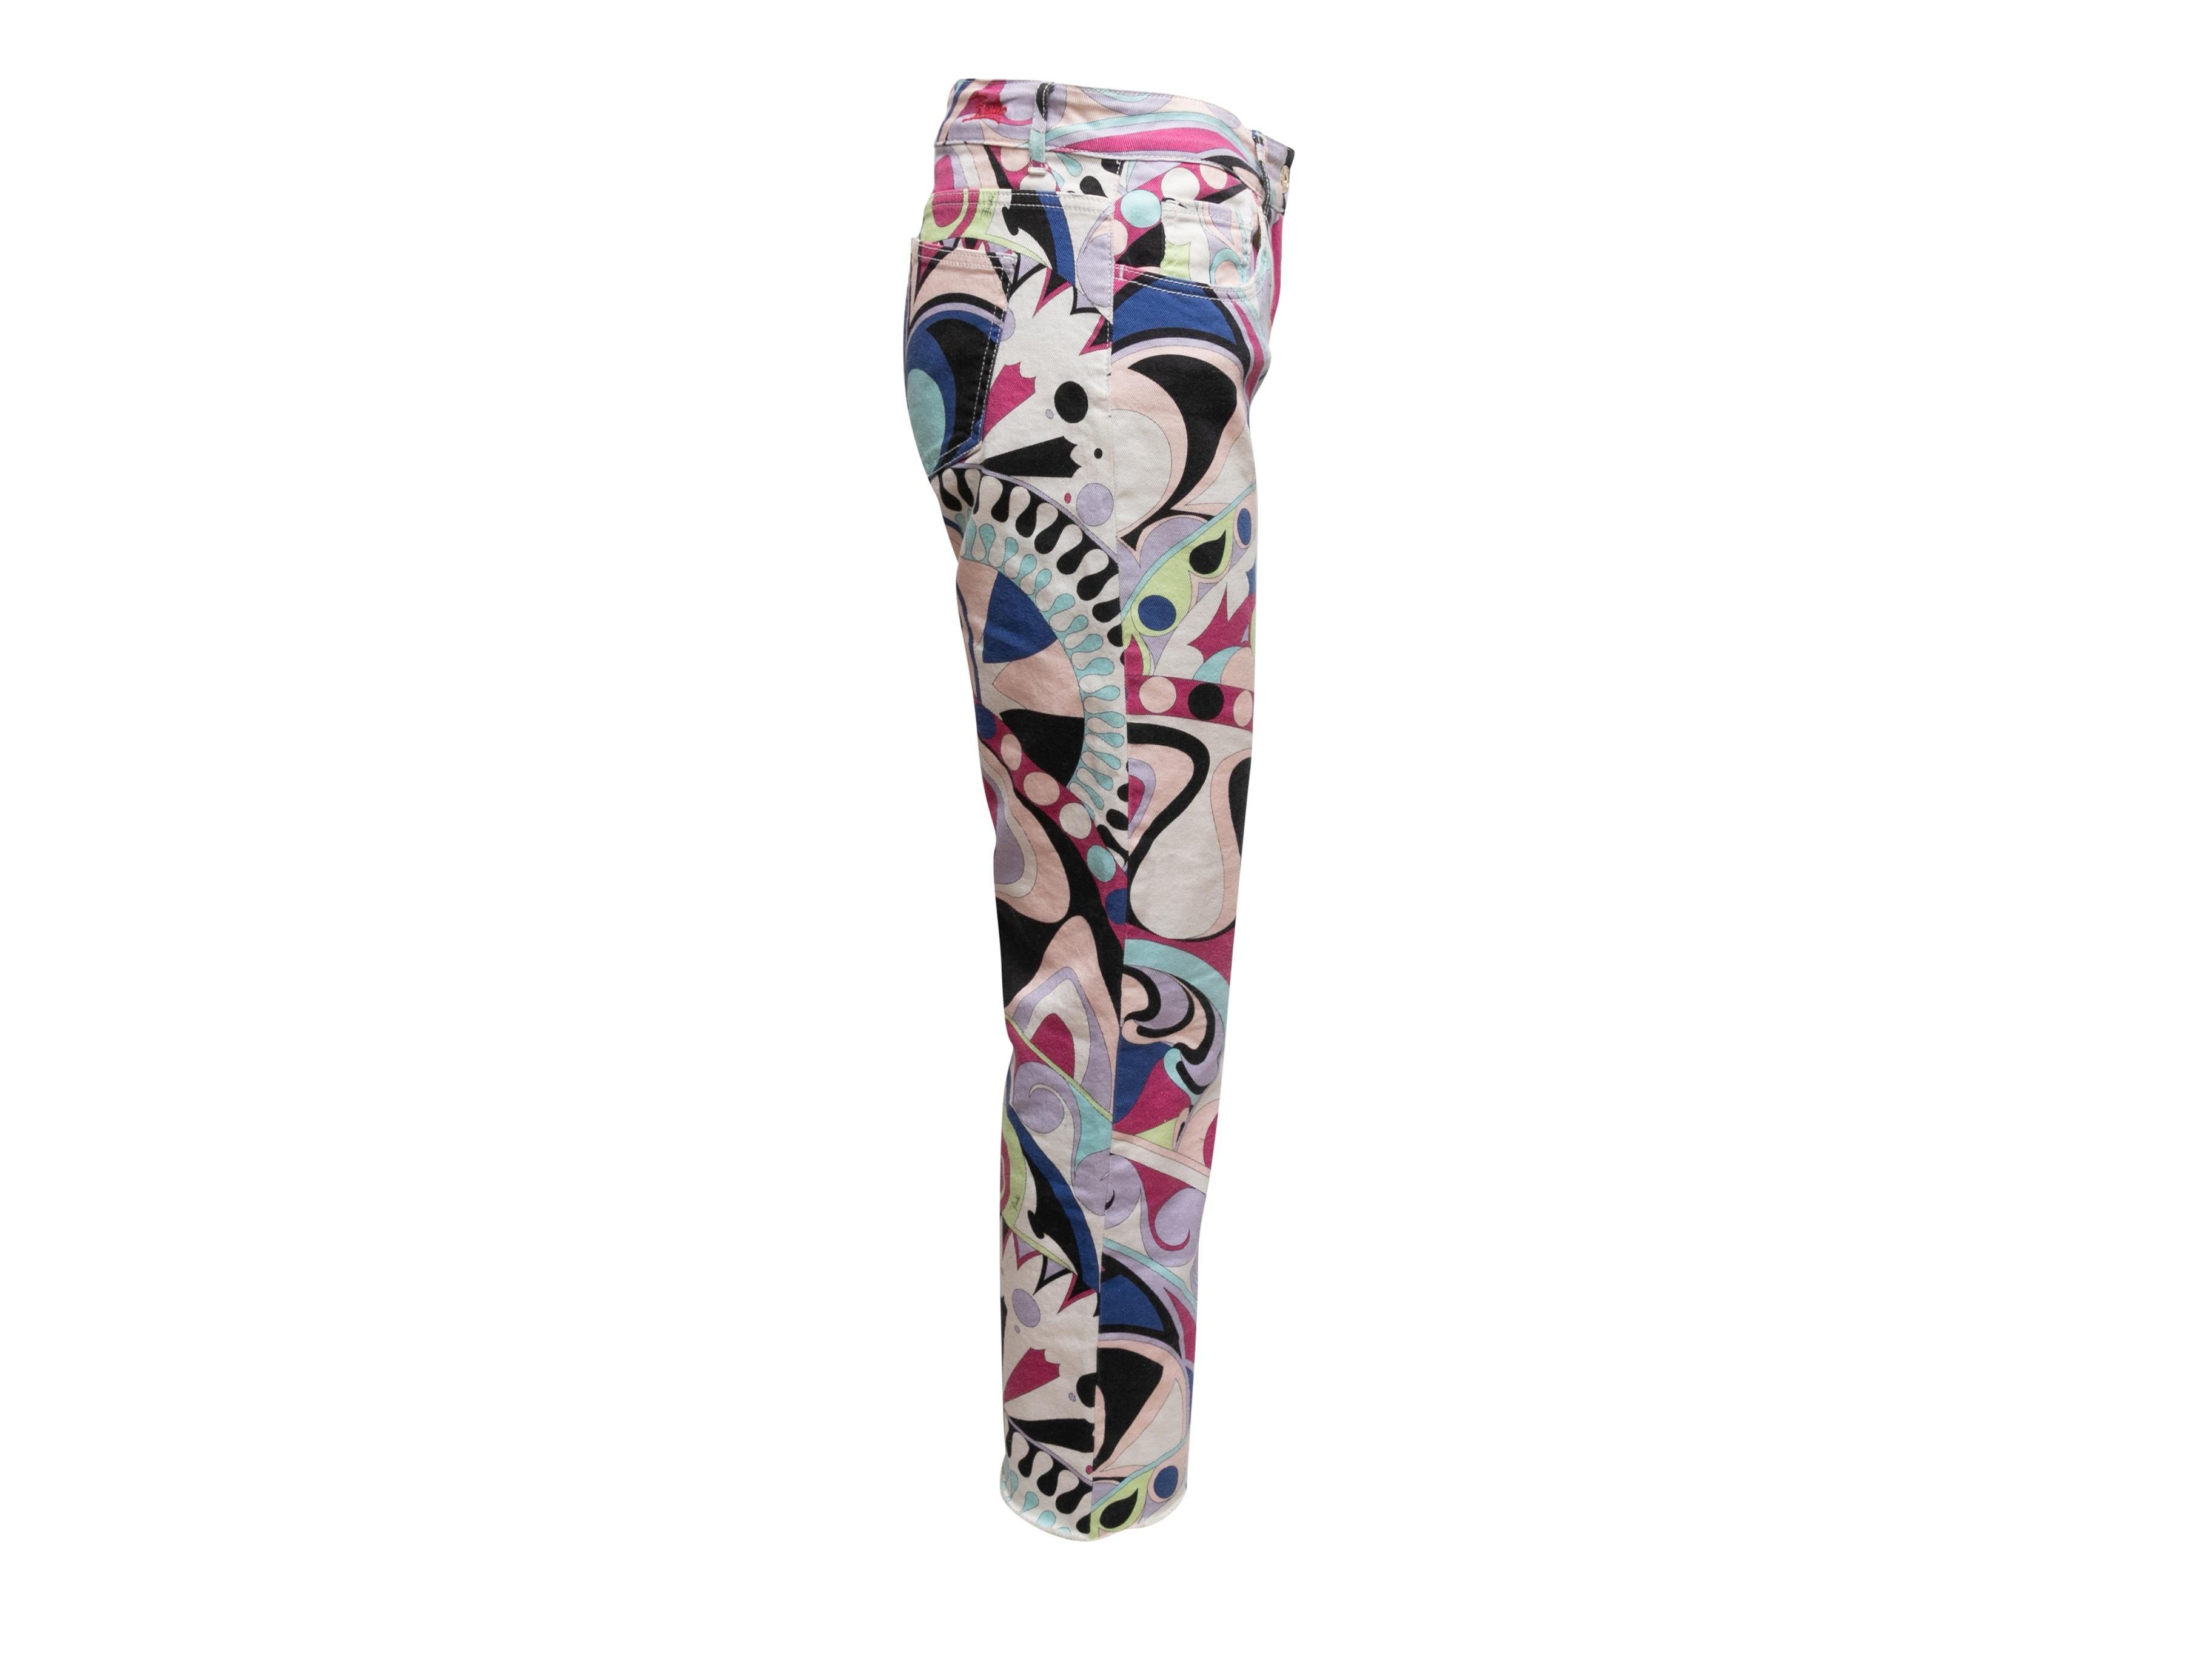 White and multicolor abstract print jeans by Emilio Pucci. Five pockets. Zip and button closures at front. 30